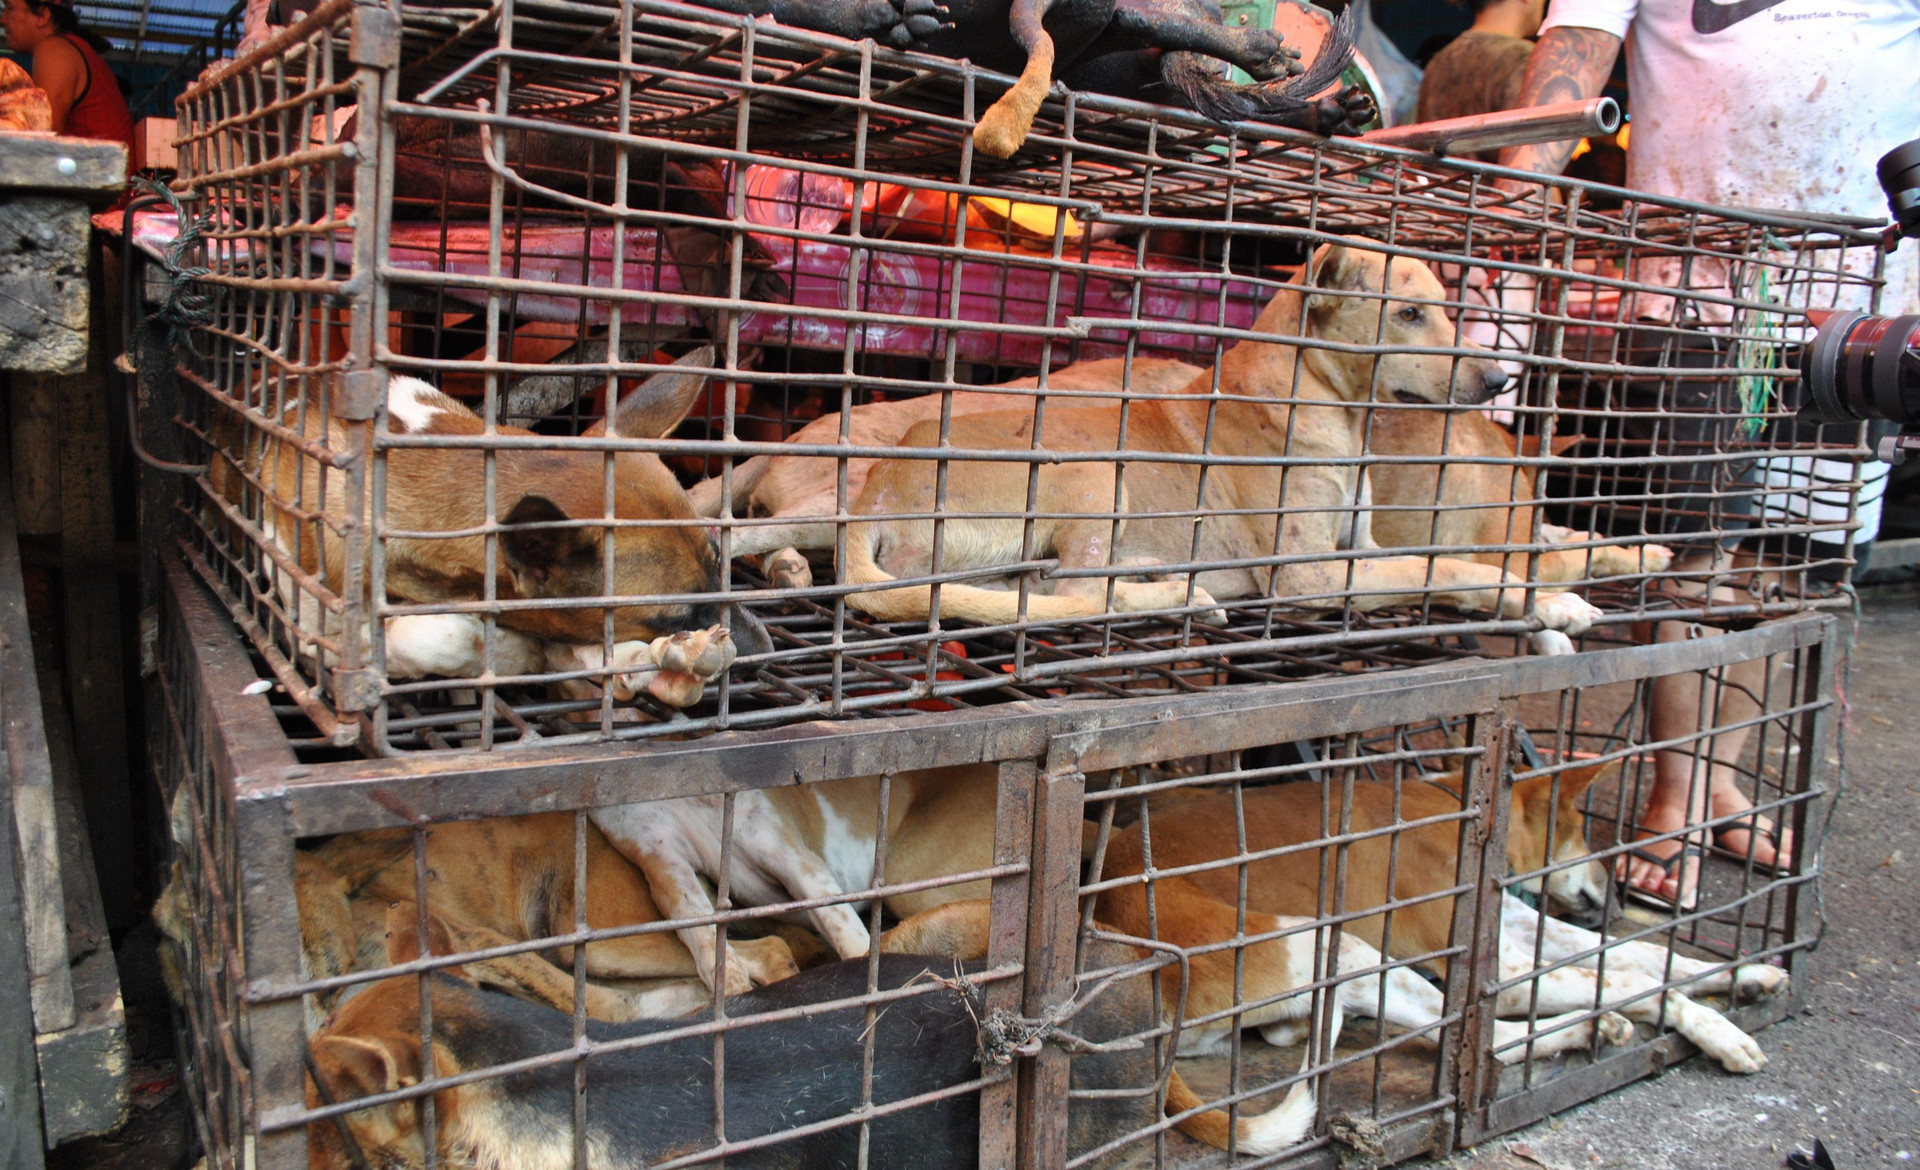 Live market in Indonesia with dogs in cages awaiting slaughter